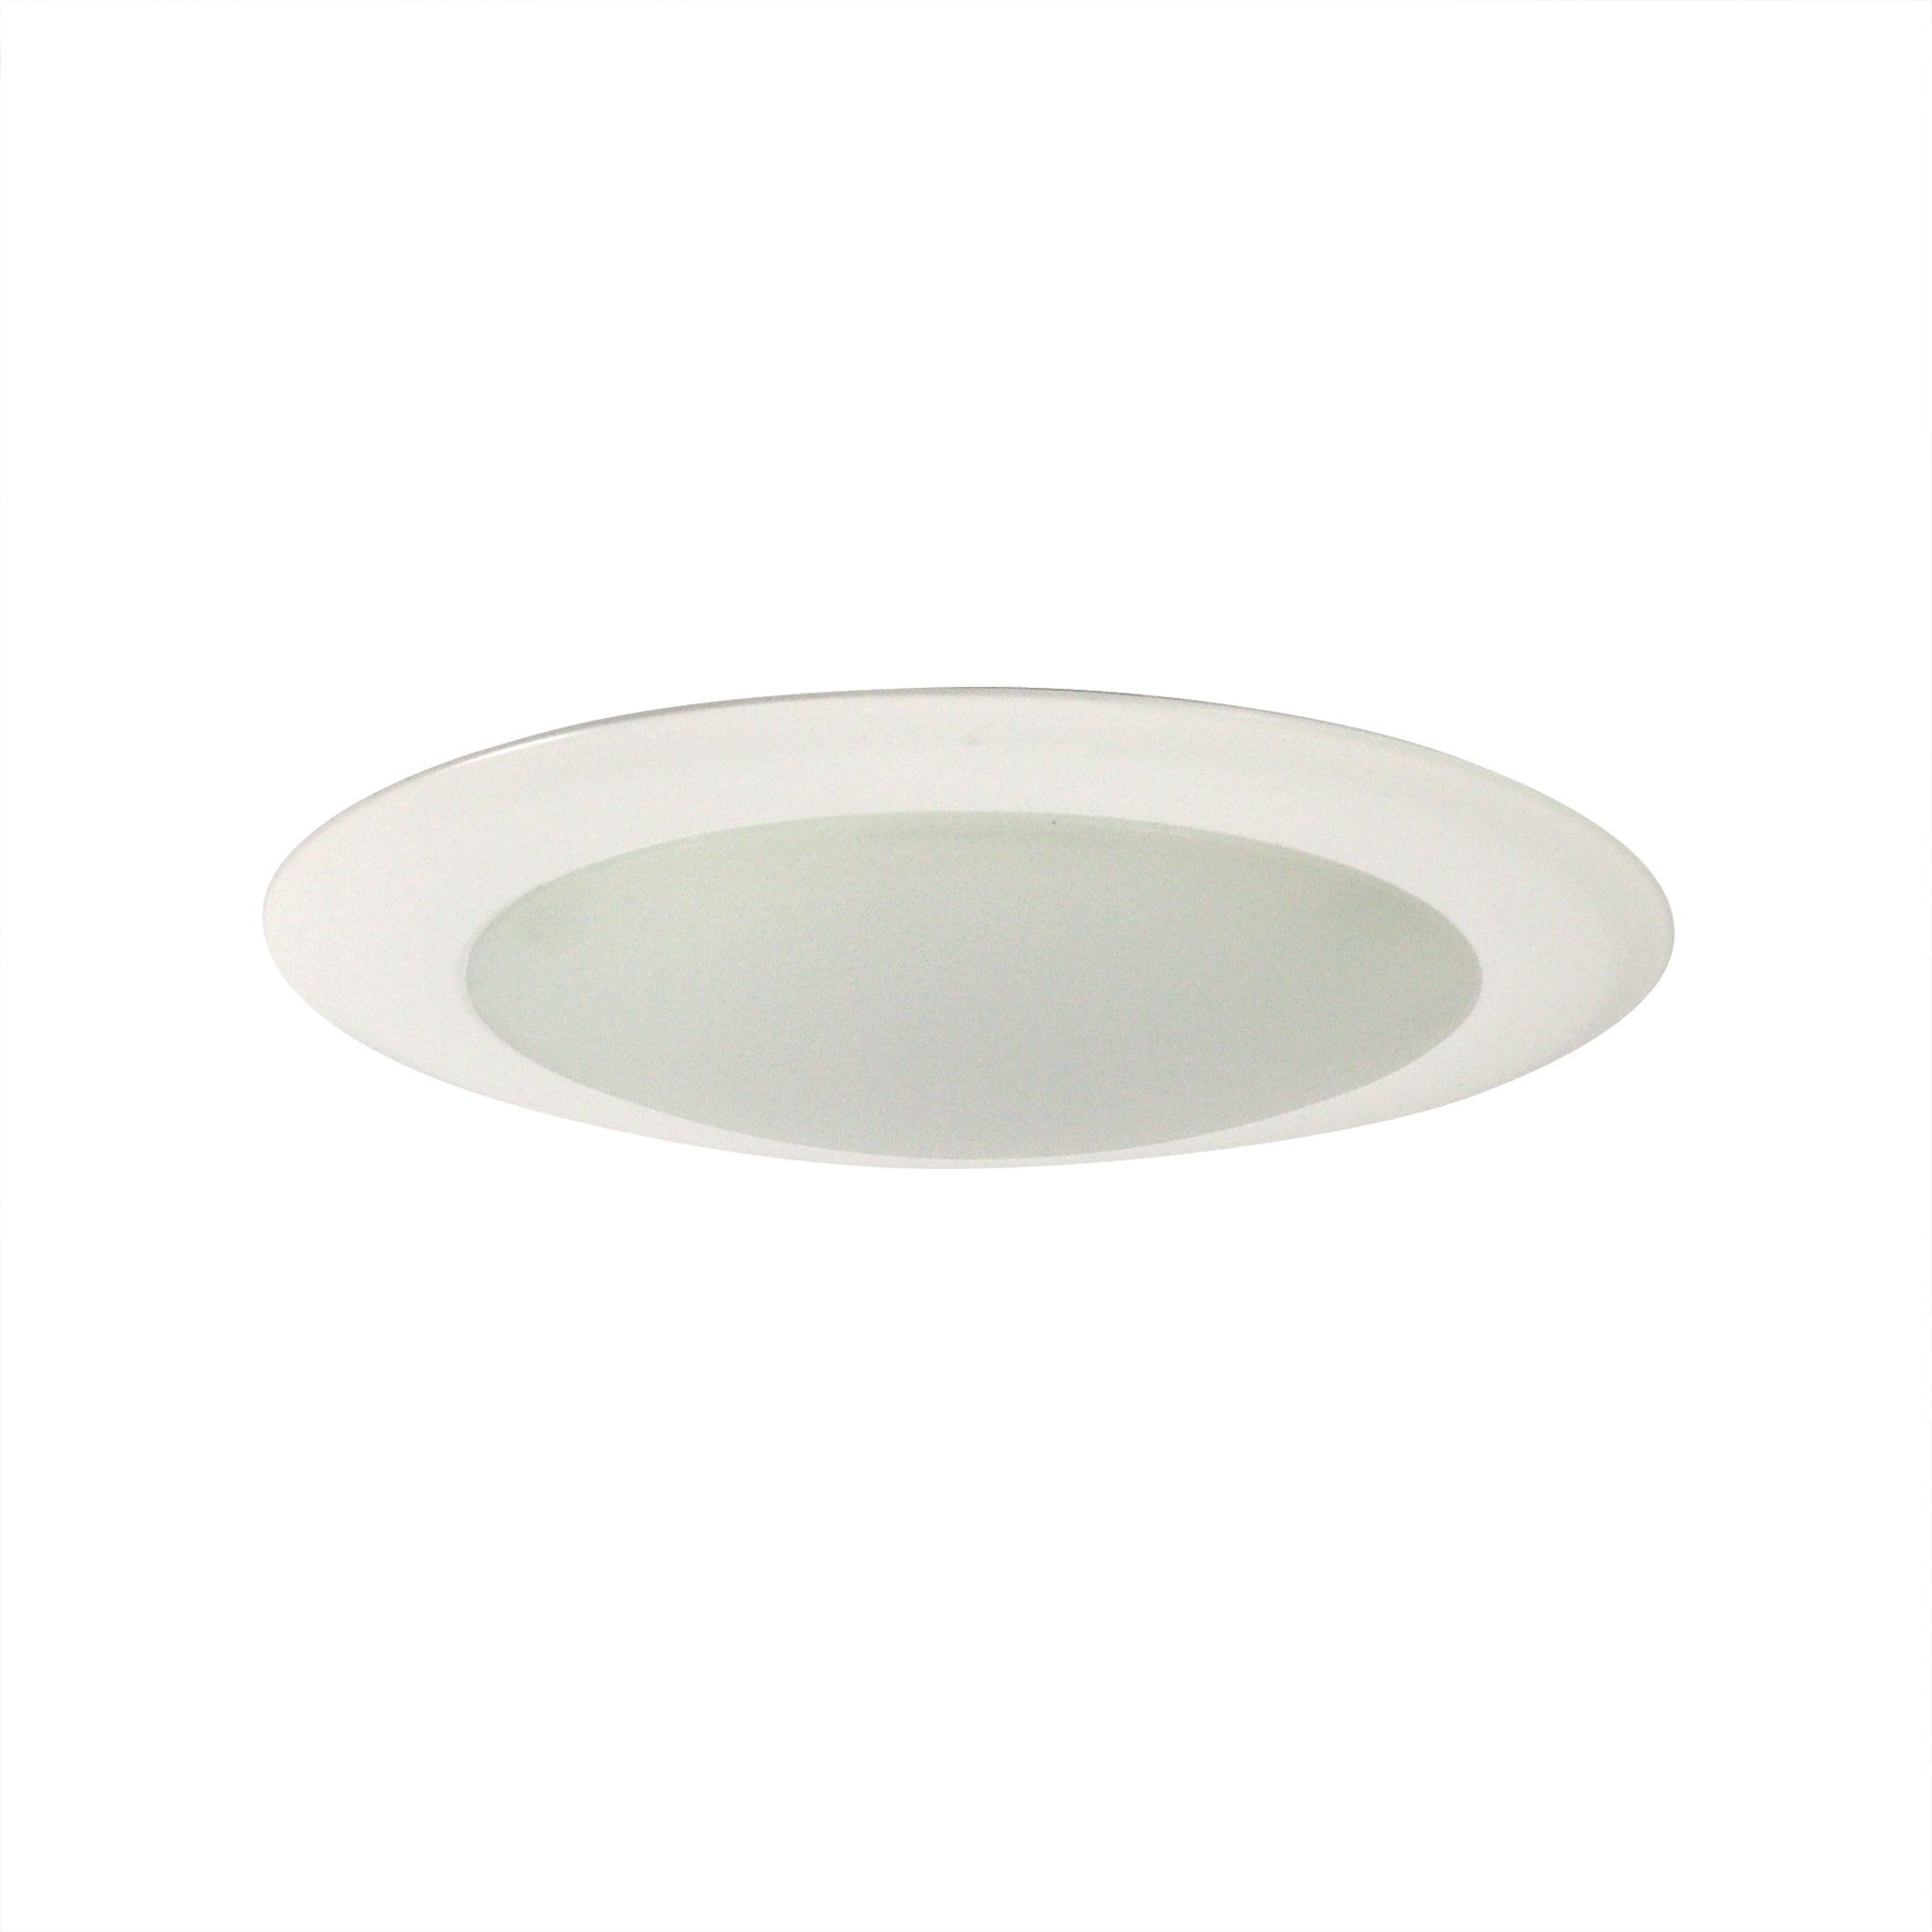 Nora Lighting NLOPAC-R6509T2427W - Surface - 6 Inch AC Opal LED Surface Mount, 1150lm / 16.5W, 2700K, White finish